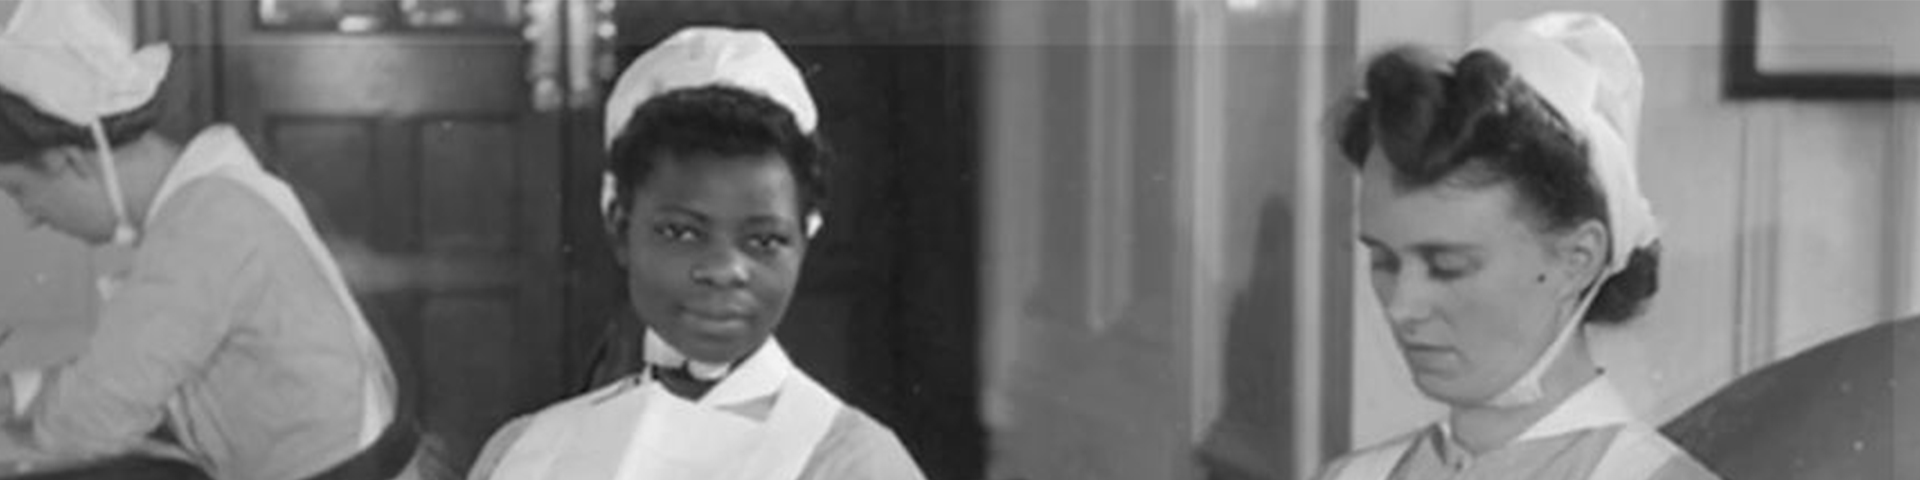 A Jamaican nurse studying in 1950s